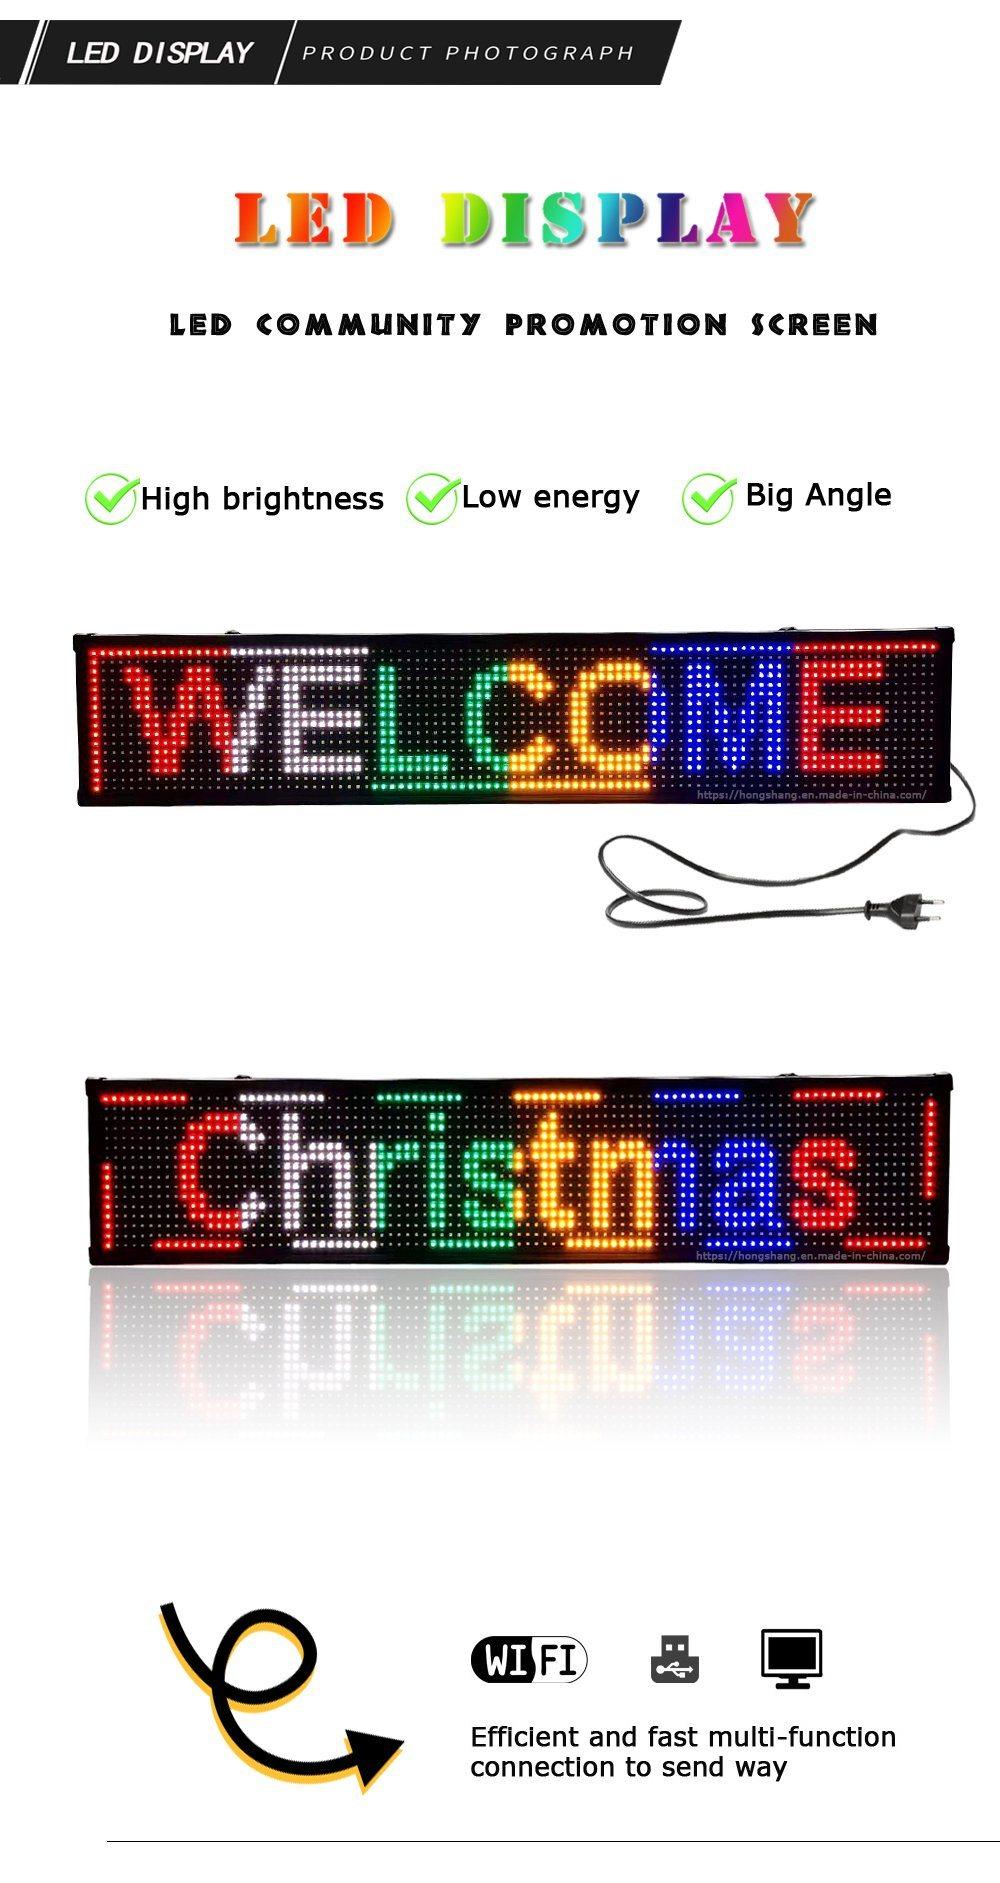 Export Aluminum LED Screen to Make Indoor and Outdoor Advertising Signs Wall Display Screen